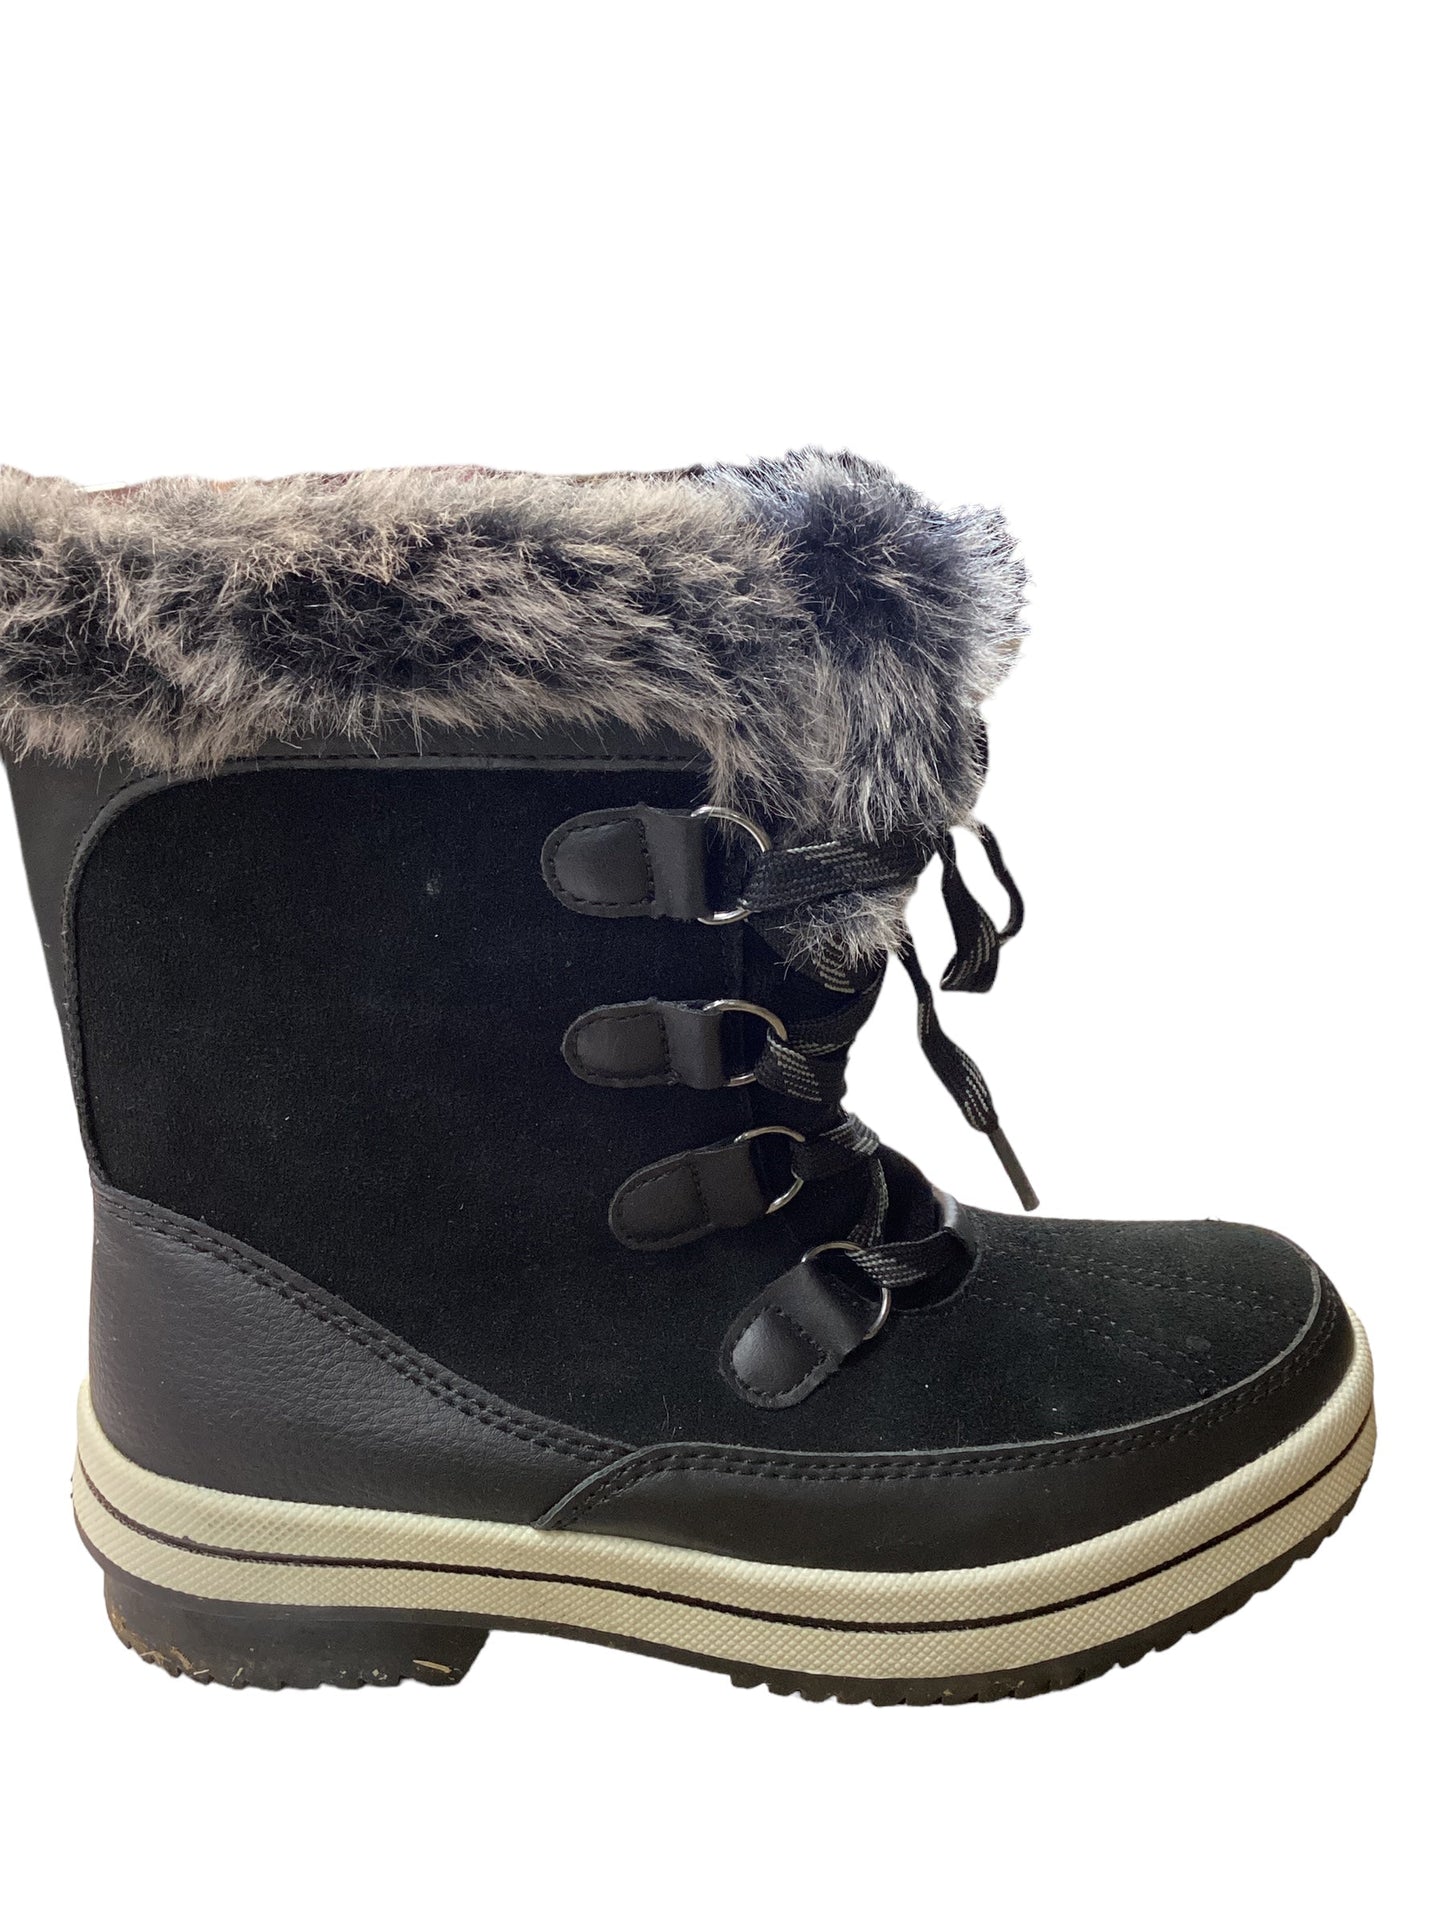 Boots Snow By Universal Thread  Size: 6